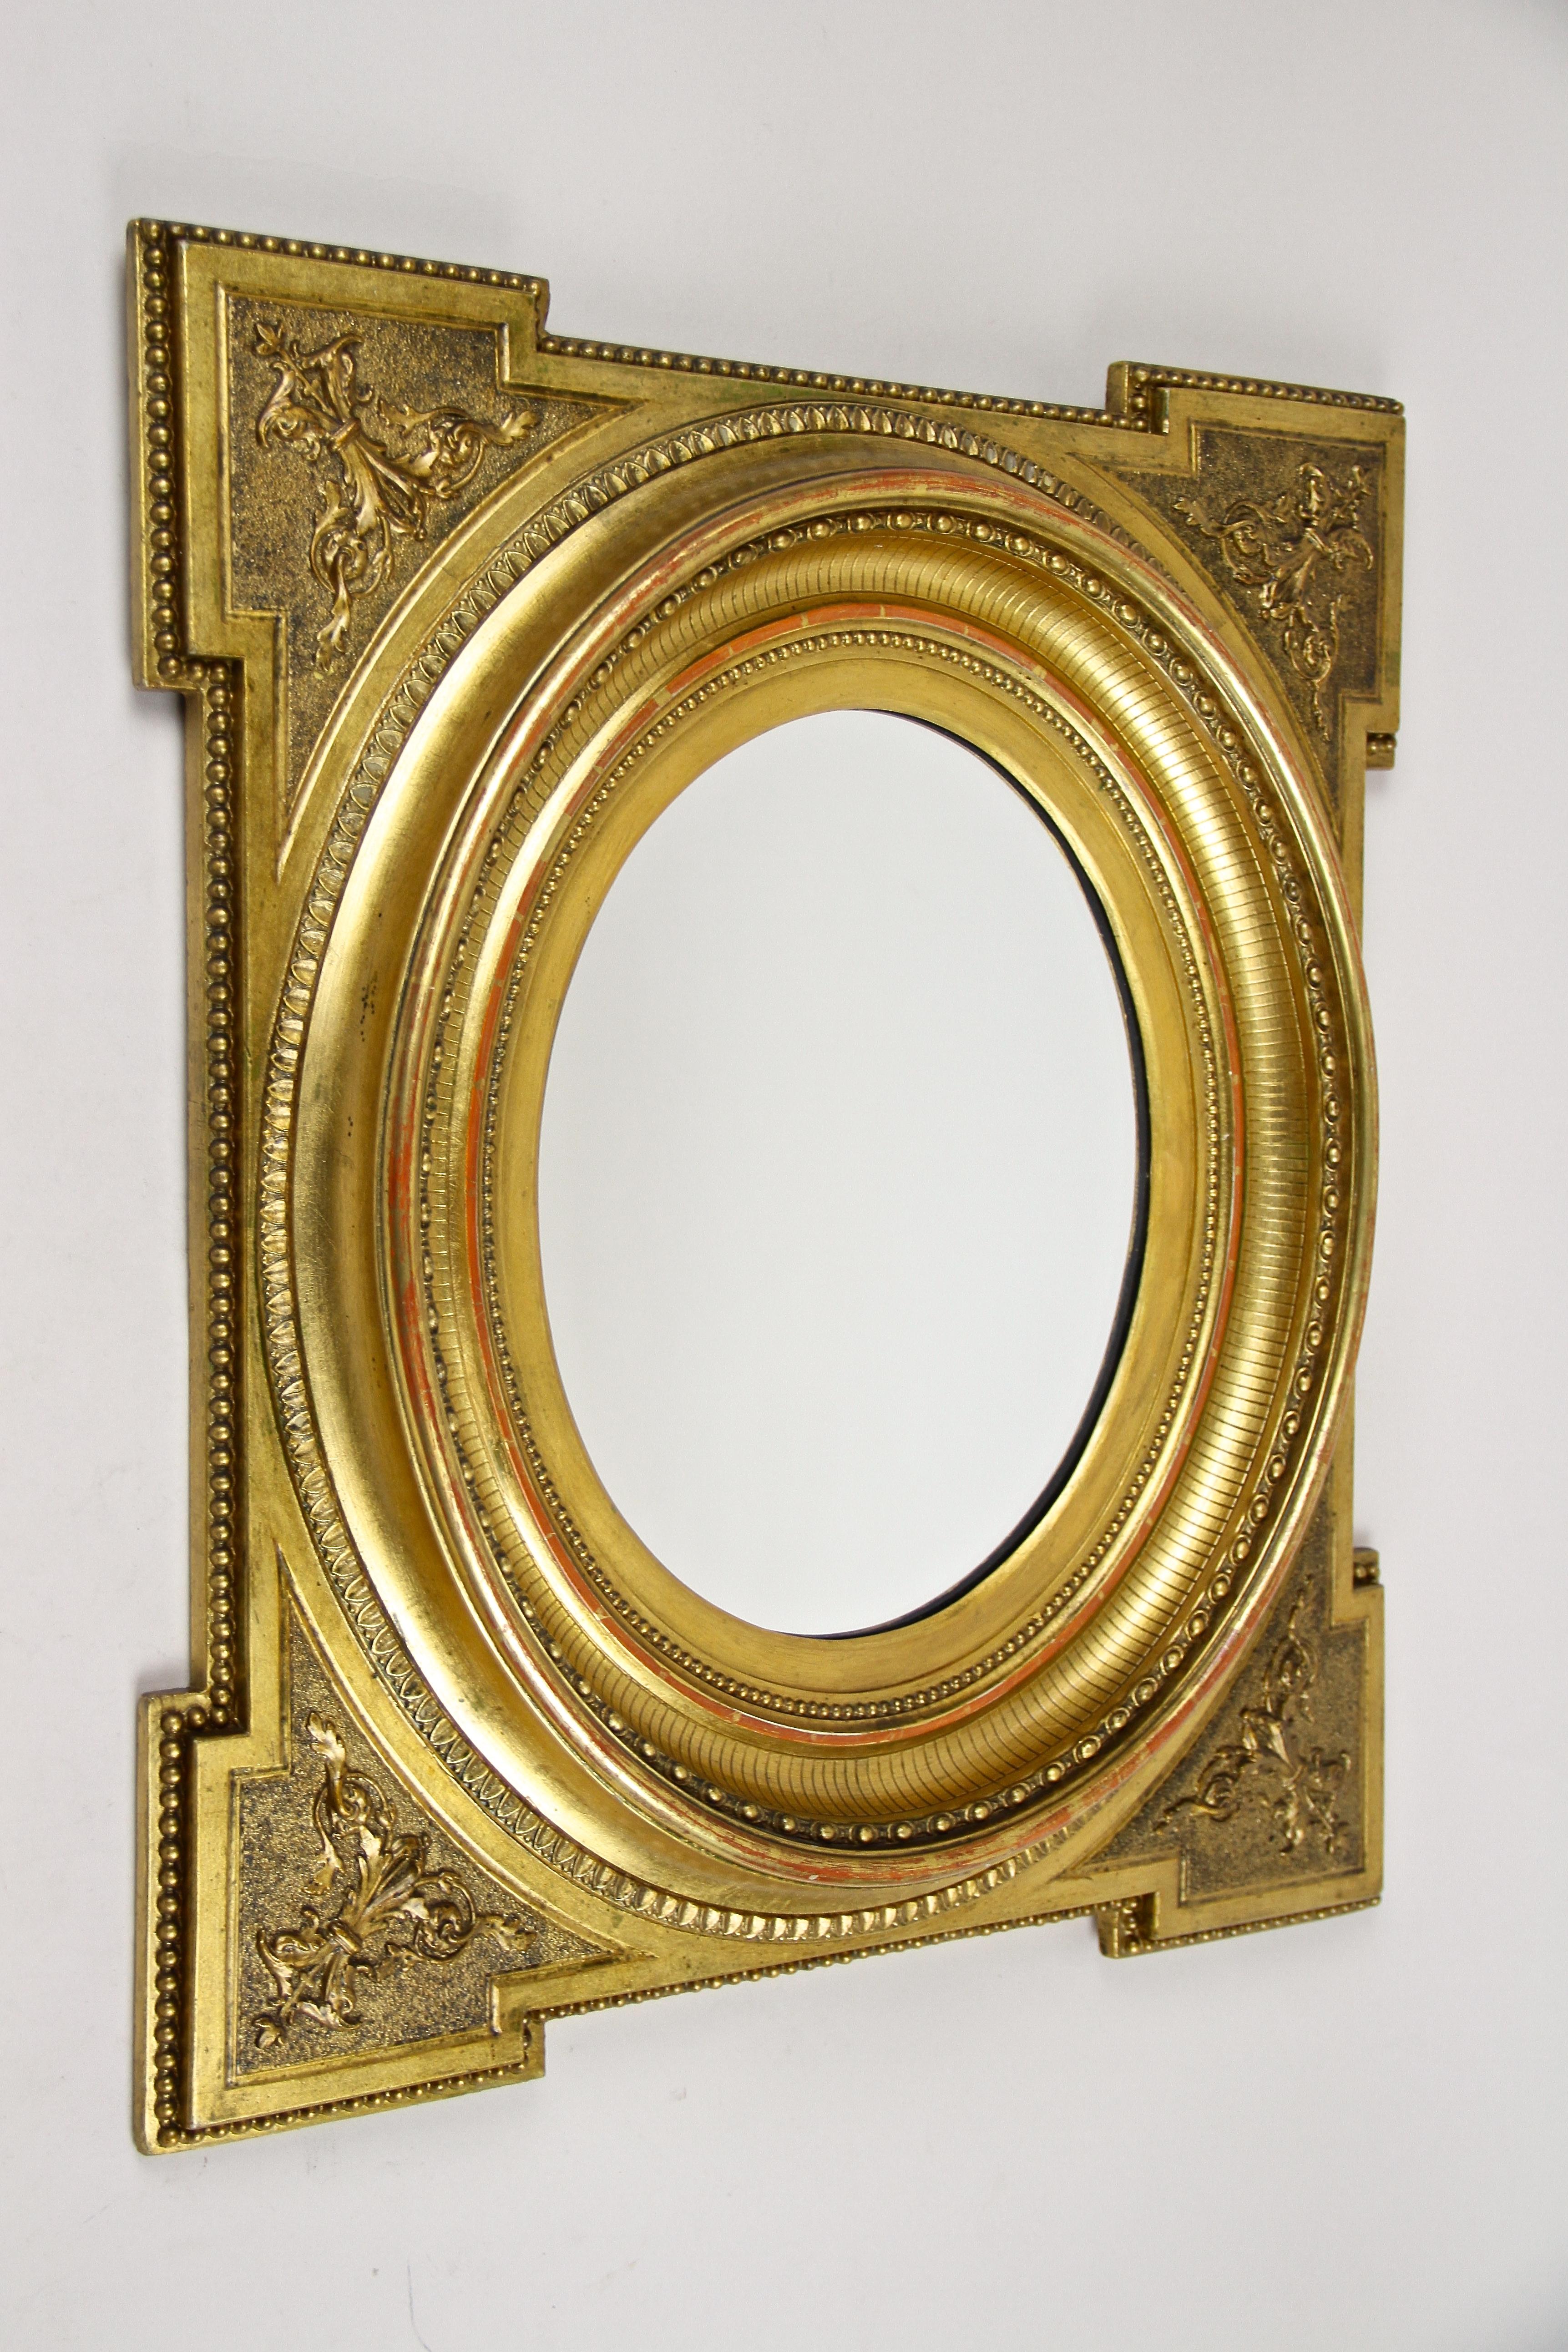 Superb gilt oval Biedermeier wall mirror from the second period around 1860 in Austria. Standing out with an incredible design, this unique late Biedermeier mirror impresses with slightly protruding corners adorned by beautiful stucco ornamentations